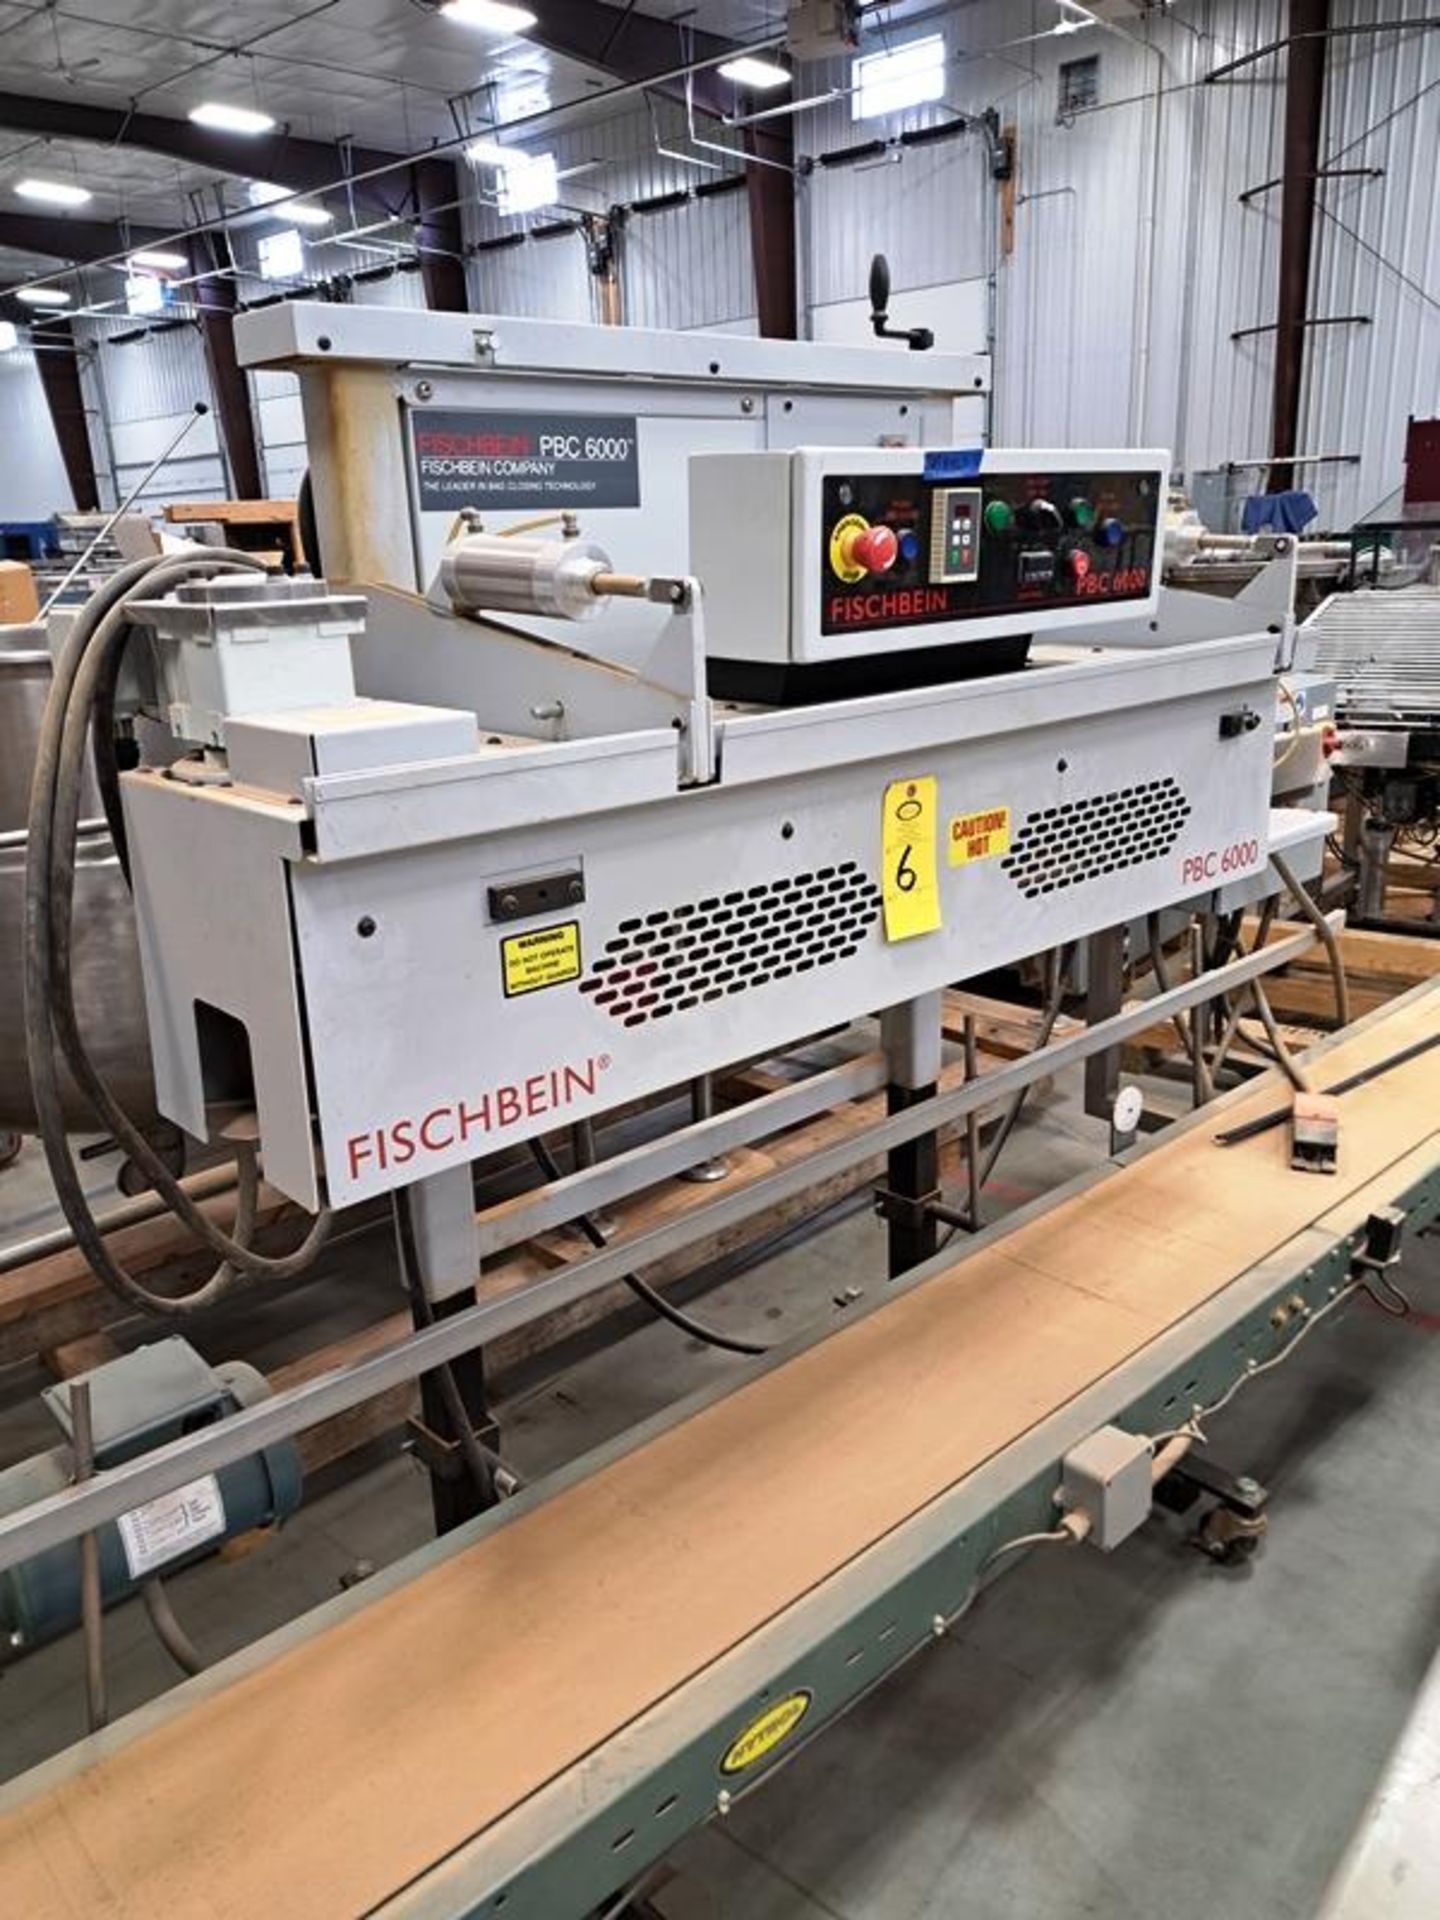 Fischbein Mdl. PBC6000 Continuous Band Sealer, manual controls, digital PBC151111101 readout, 12" - Image 3 of 9